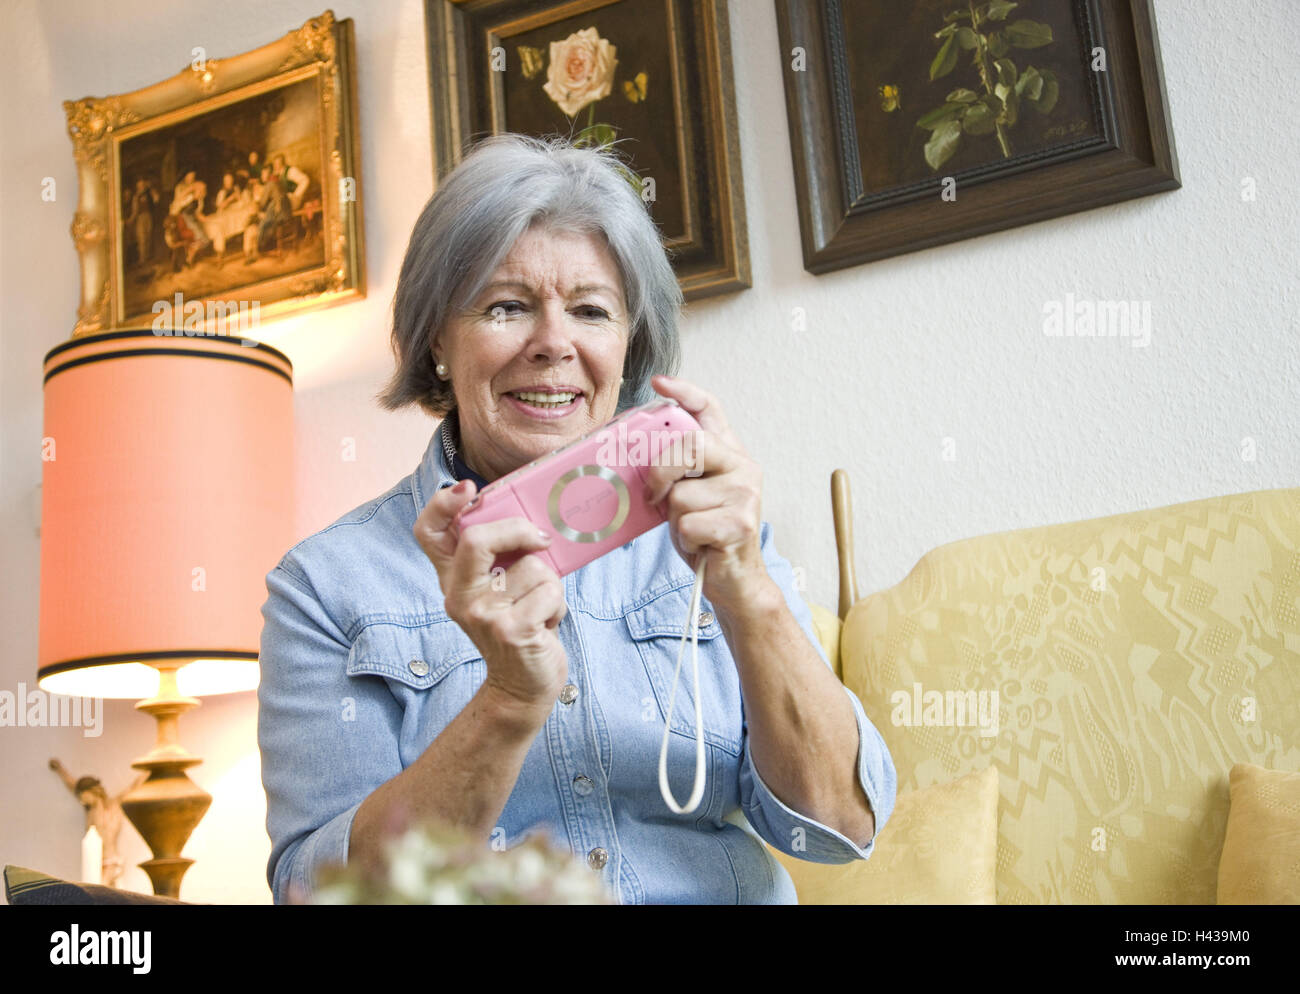 Senior, game console, play, there, smile, people, woman, pensioner, PSP, console, Gameboy, pink, memory, memory training, brain jogging, concentration, flat, standard lamp, lighting, portrait, Stock Photo